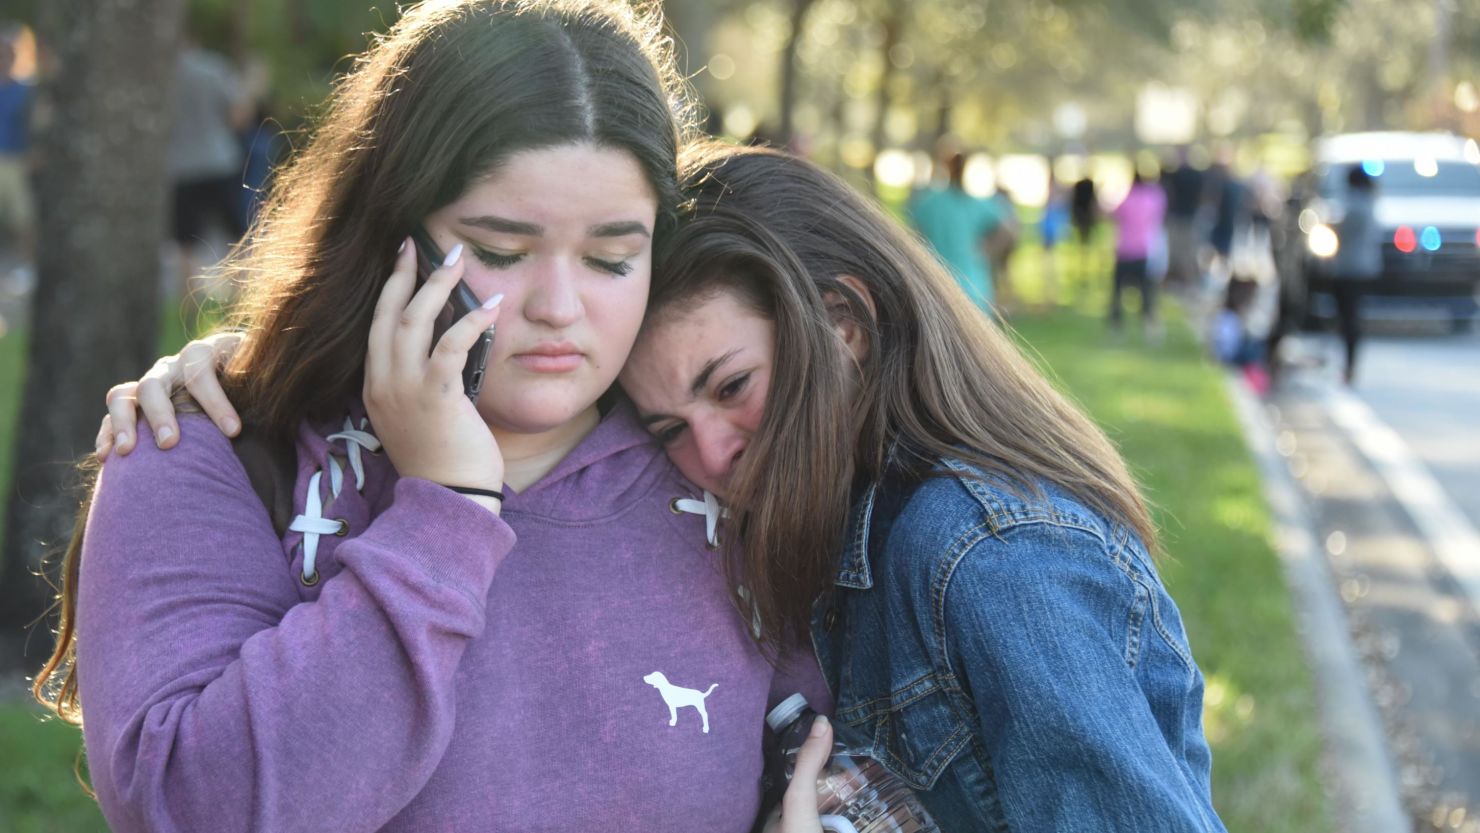 Students react following a shooting at Marjory Stoneman Douglas High School in Parkland, Florida.